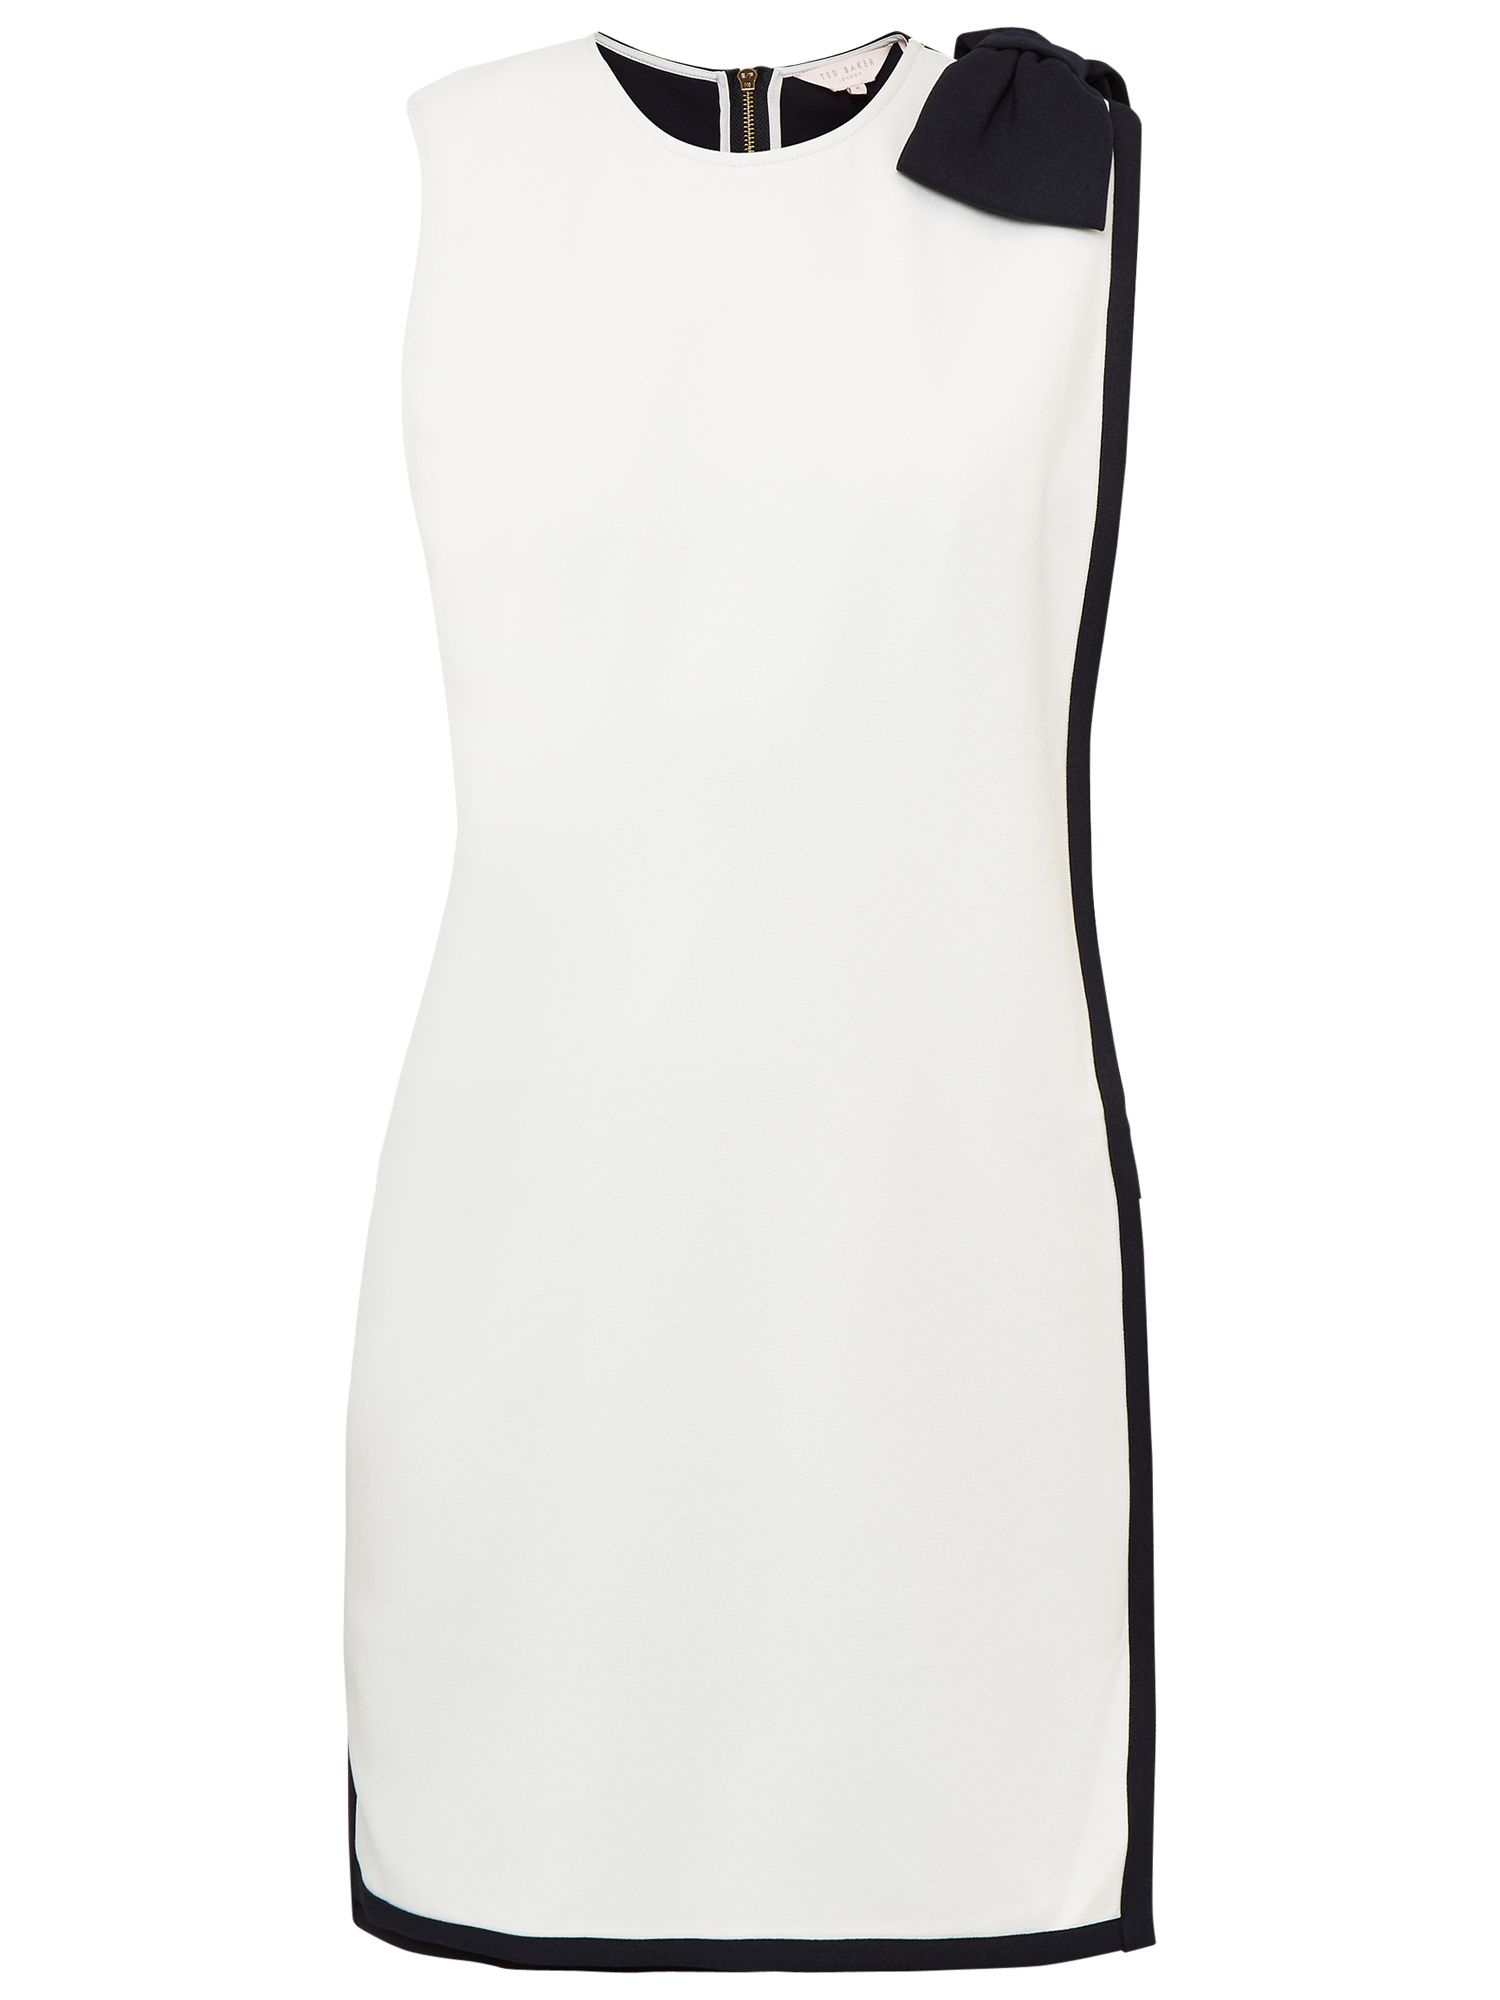 ted baker black dress with white bow